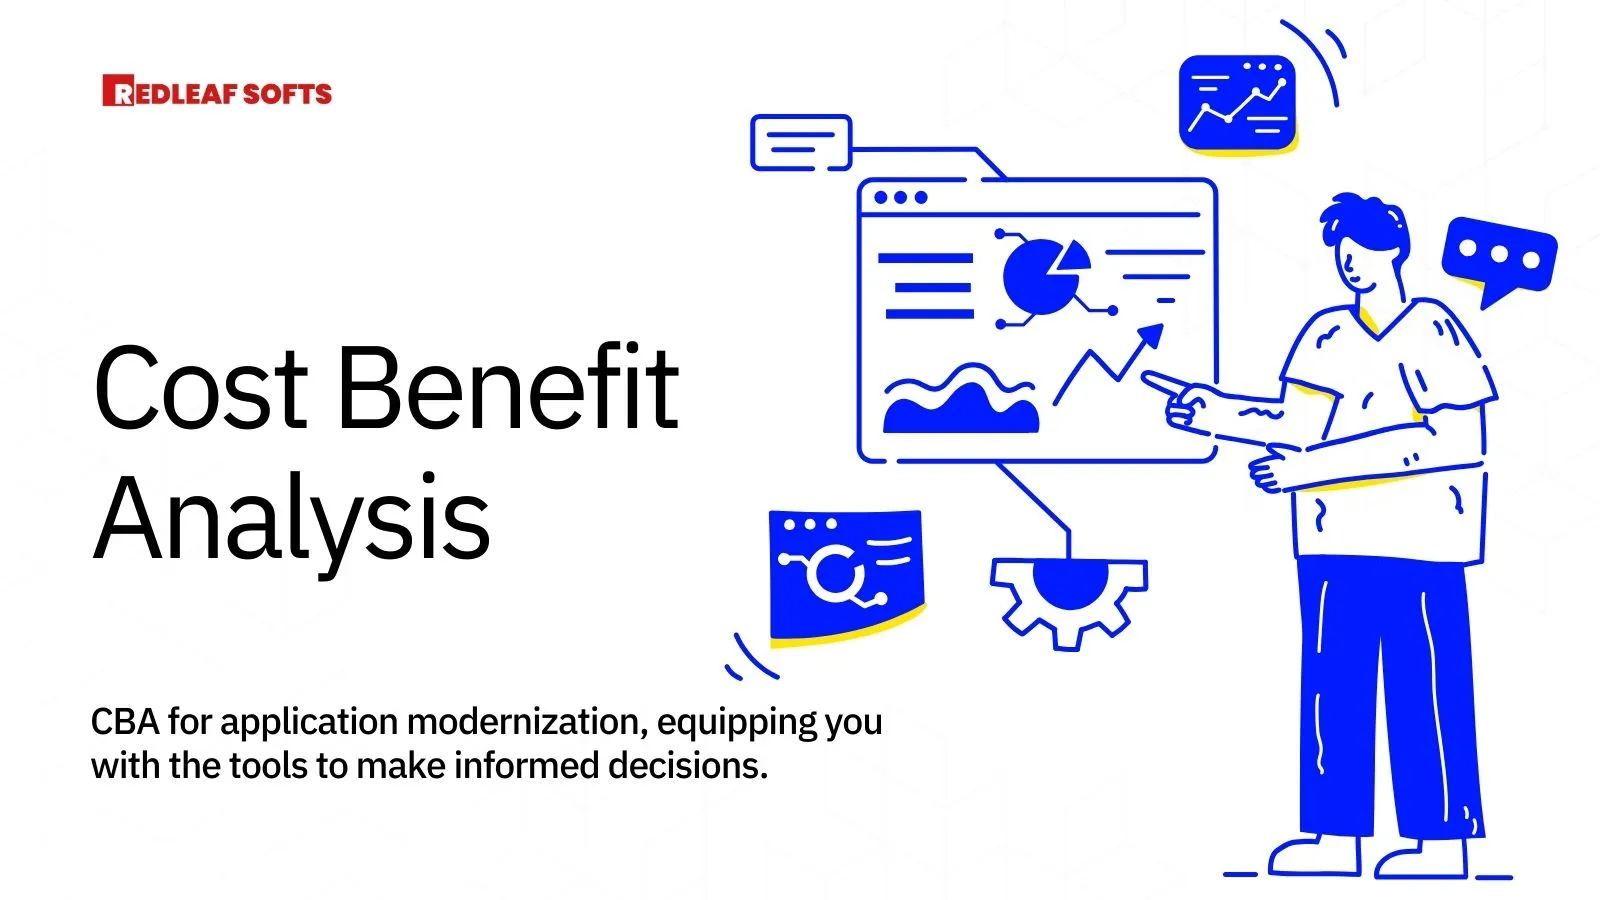 Cost-Benefit Analysis: Evaluating the Financial Impact of Application Modernization